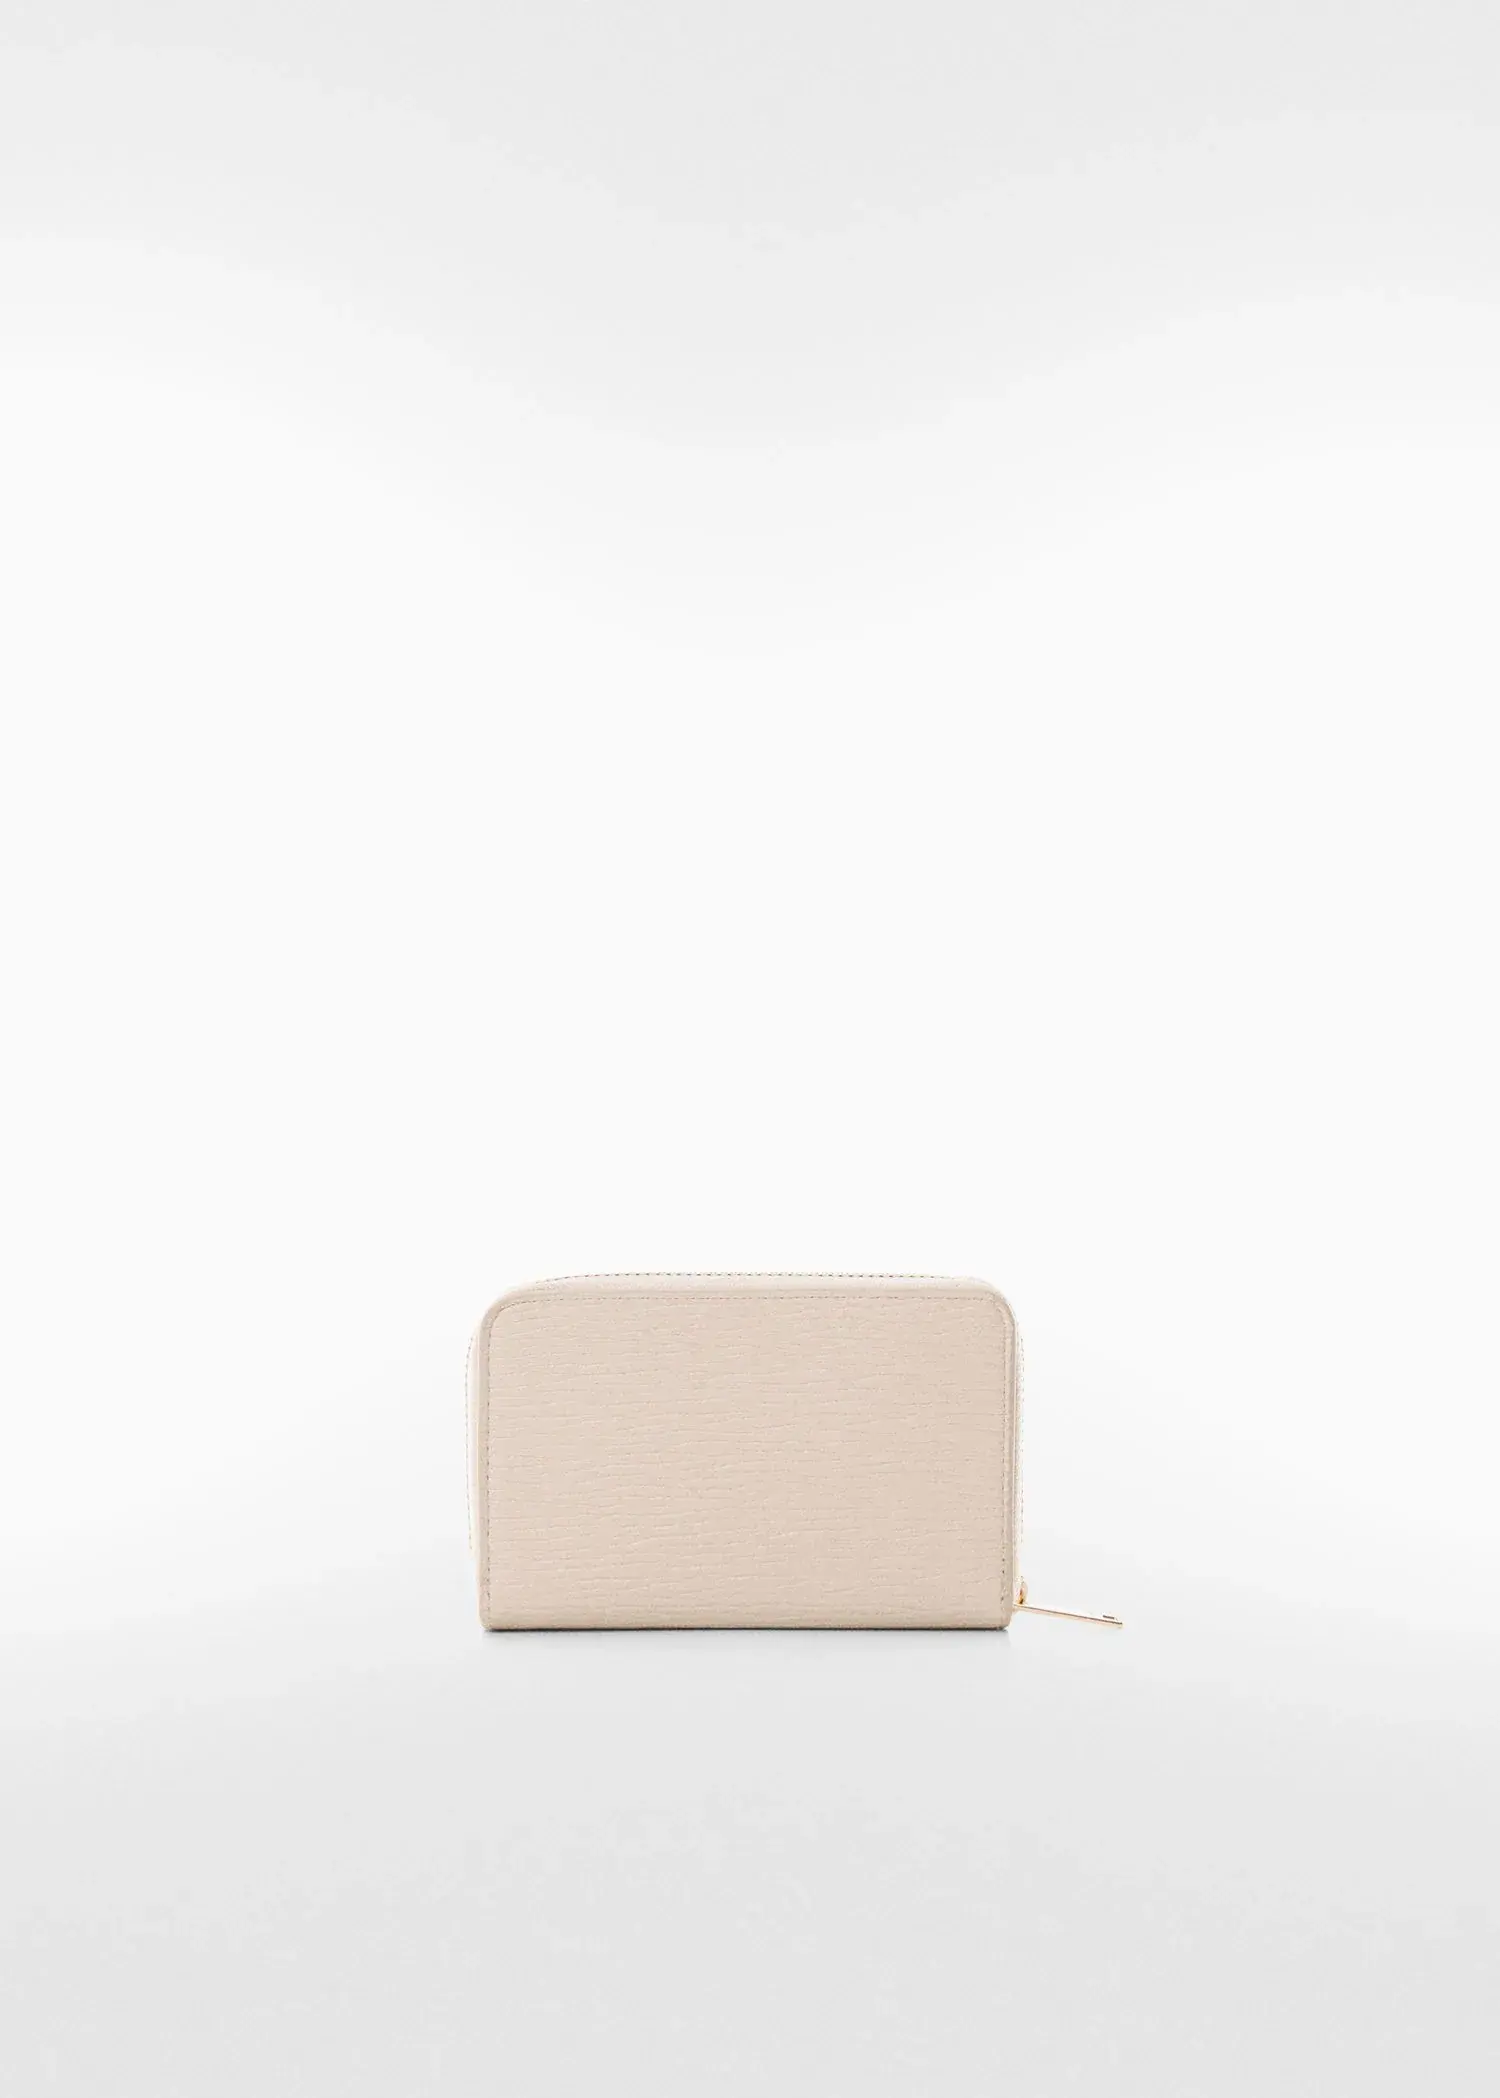 Mango Textured wallet with embossed logo. 3